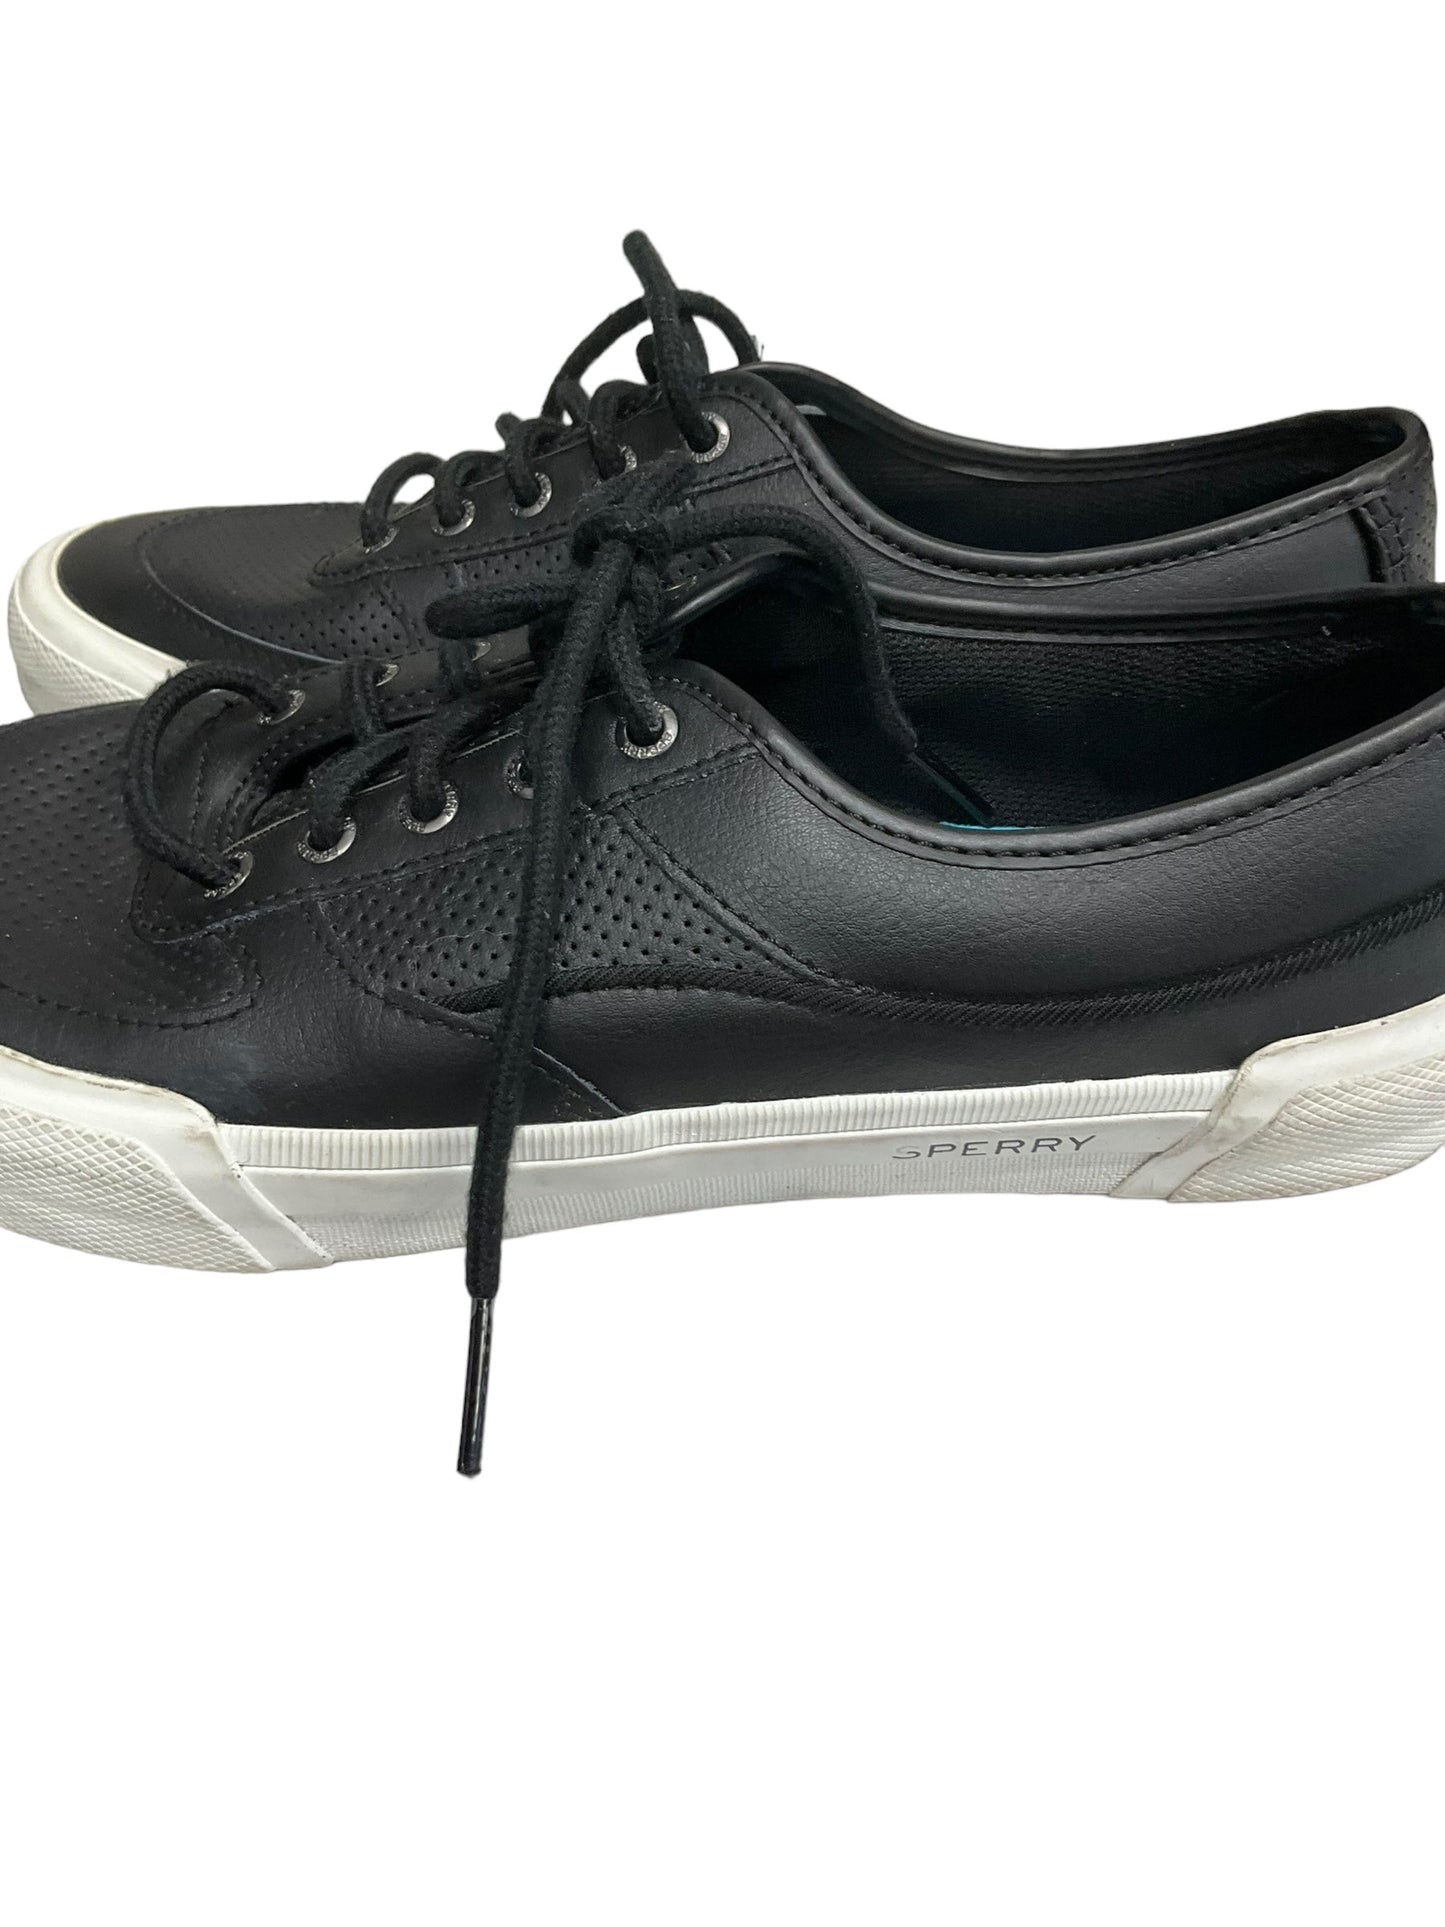 Black Shoes Athletic Sperry, Size 9.5